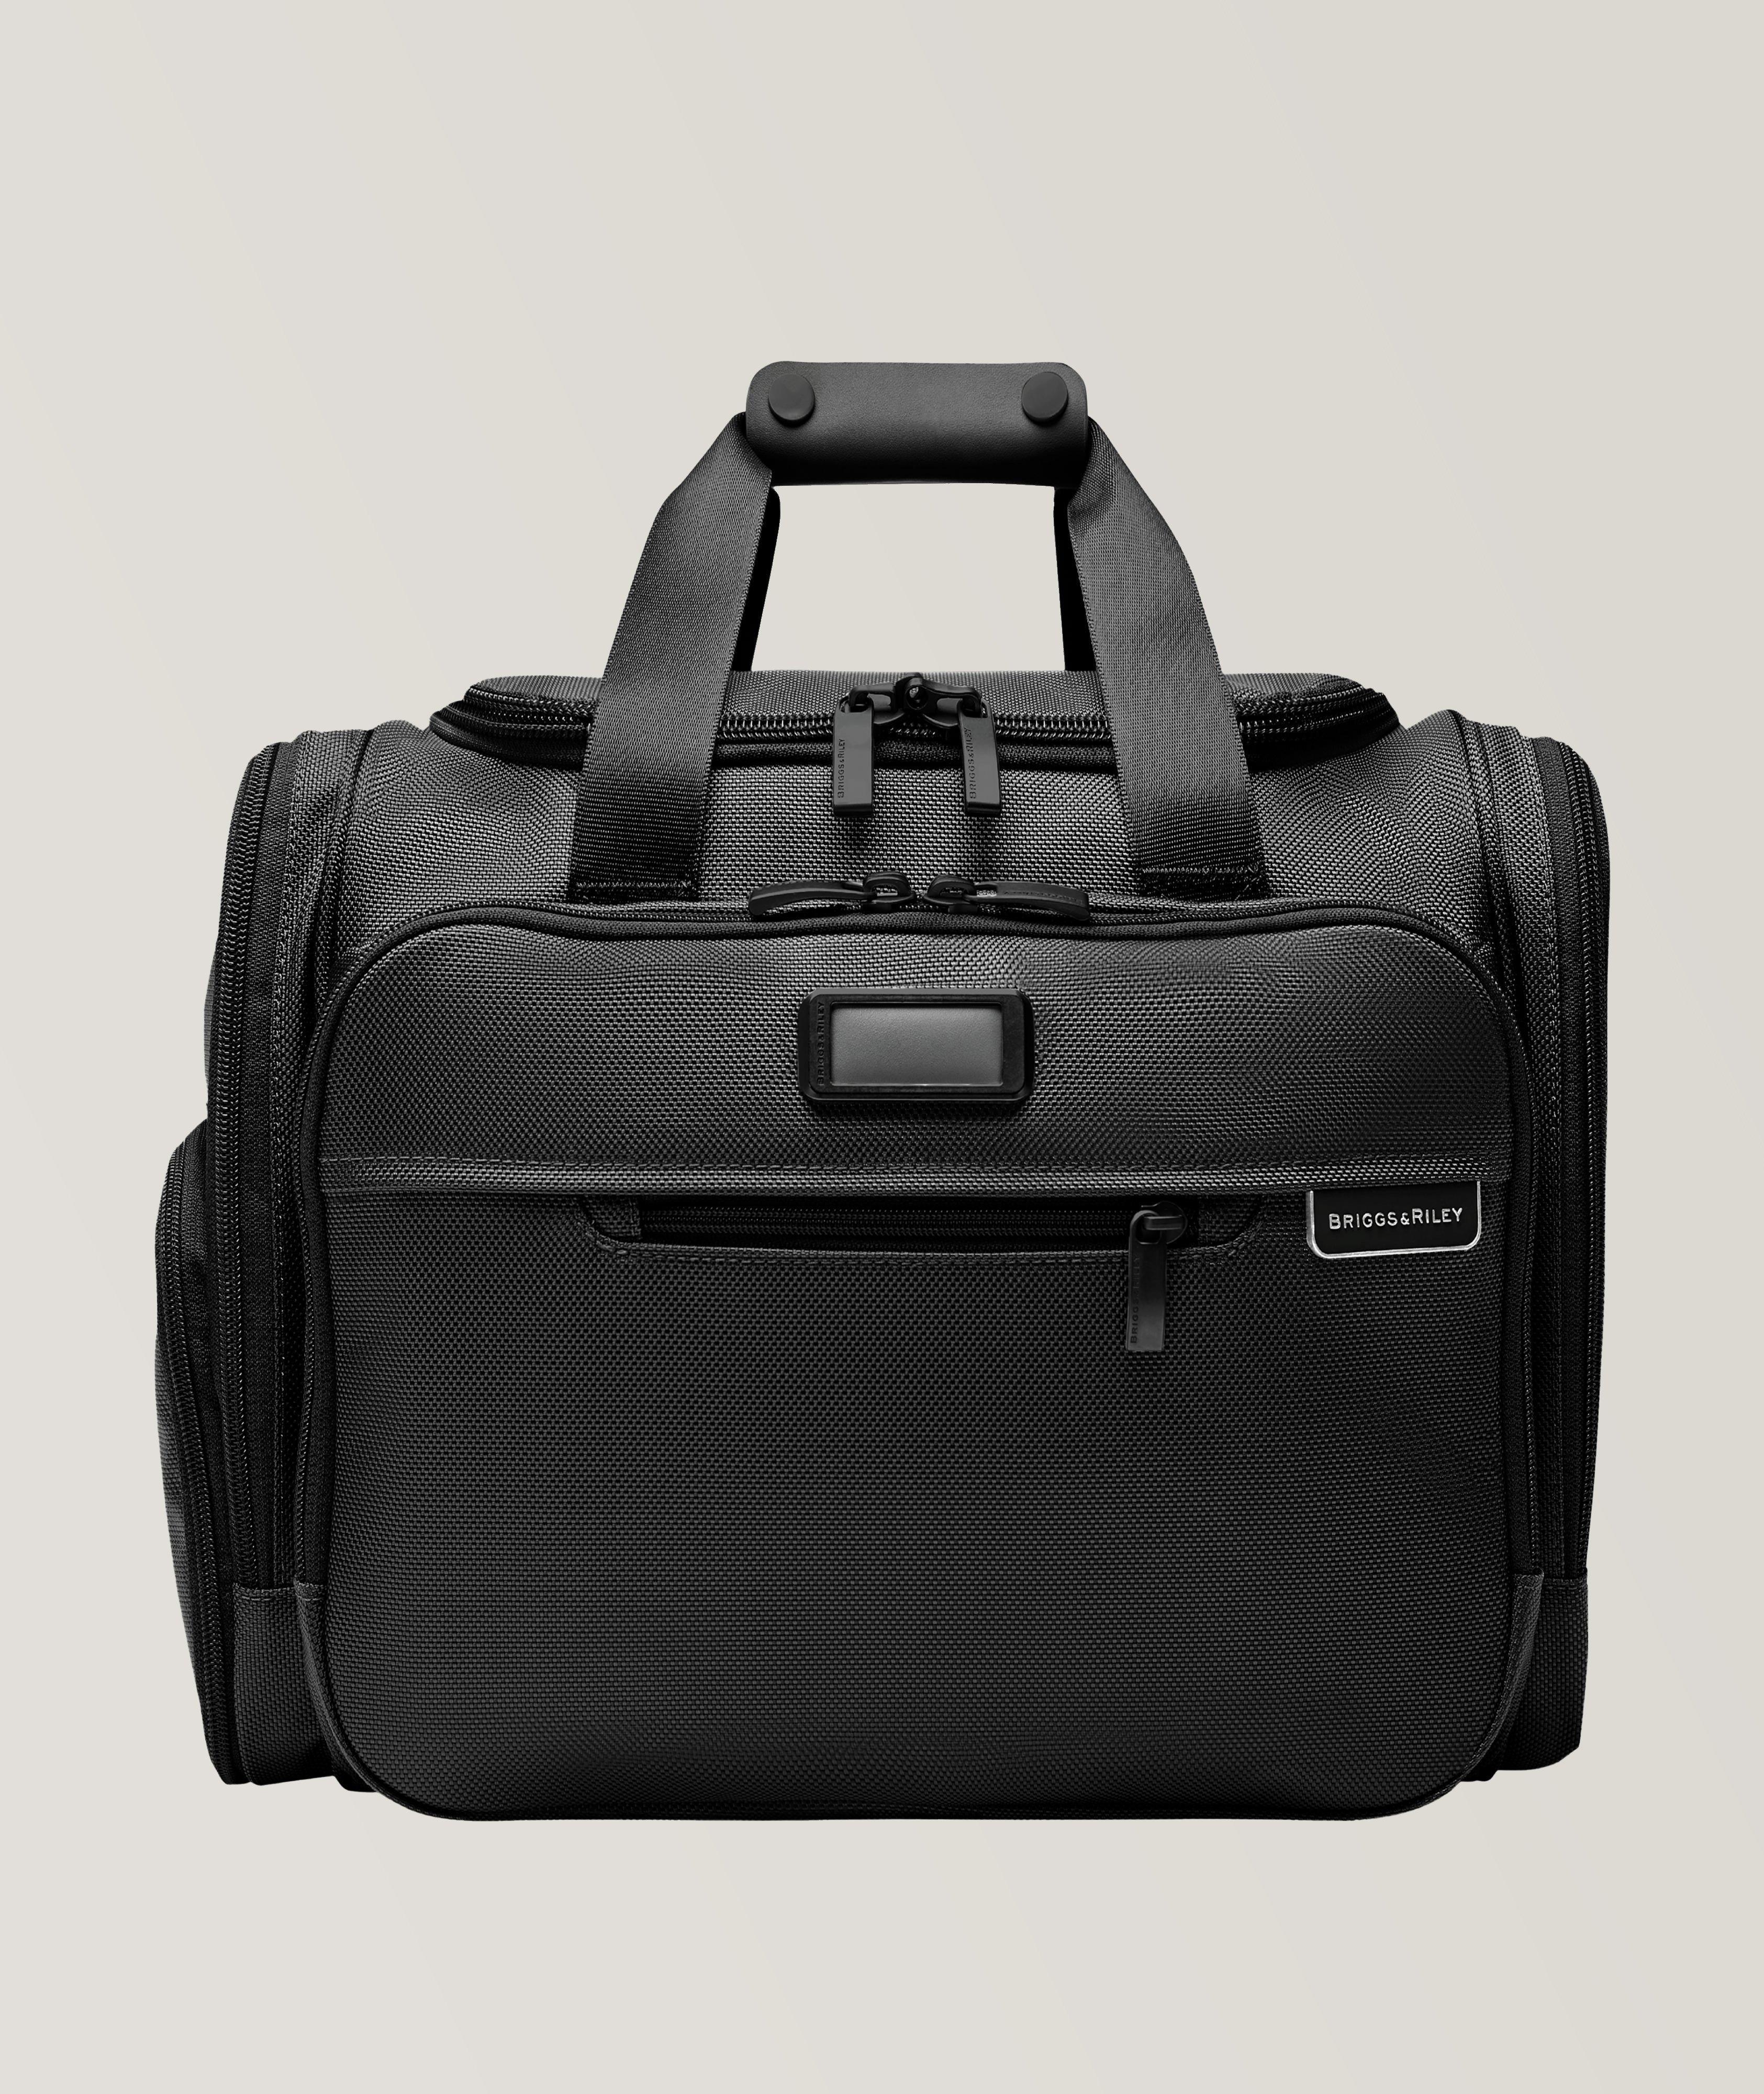 Baseline Collection Underseat Duffle Bag